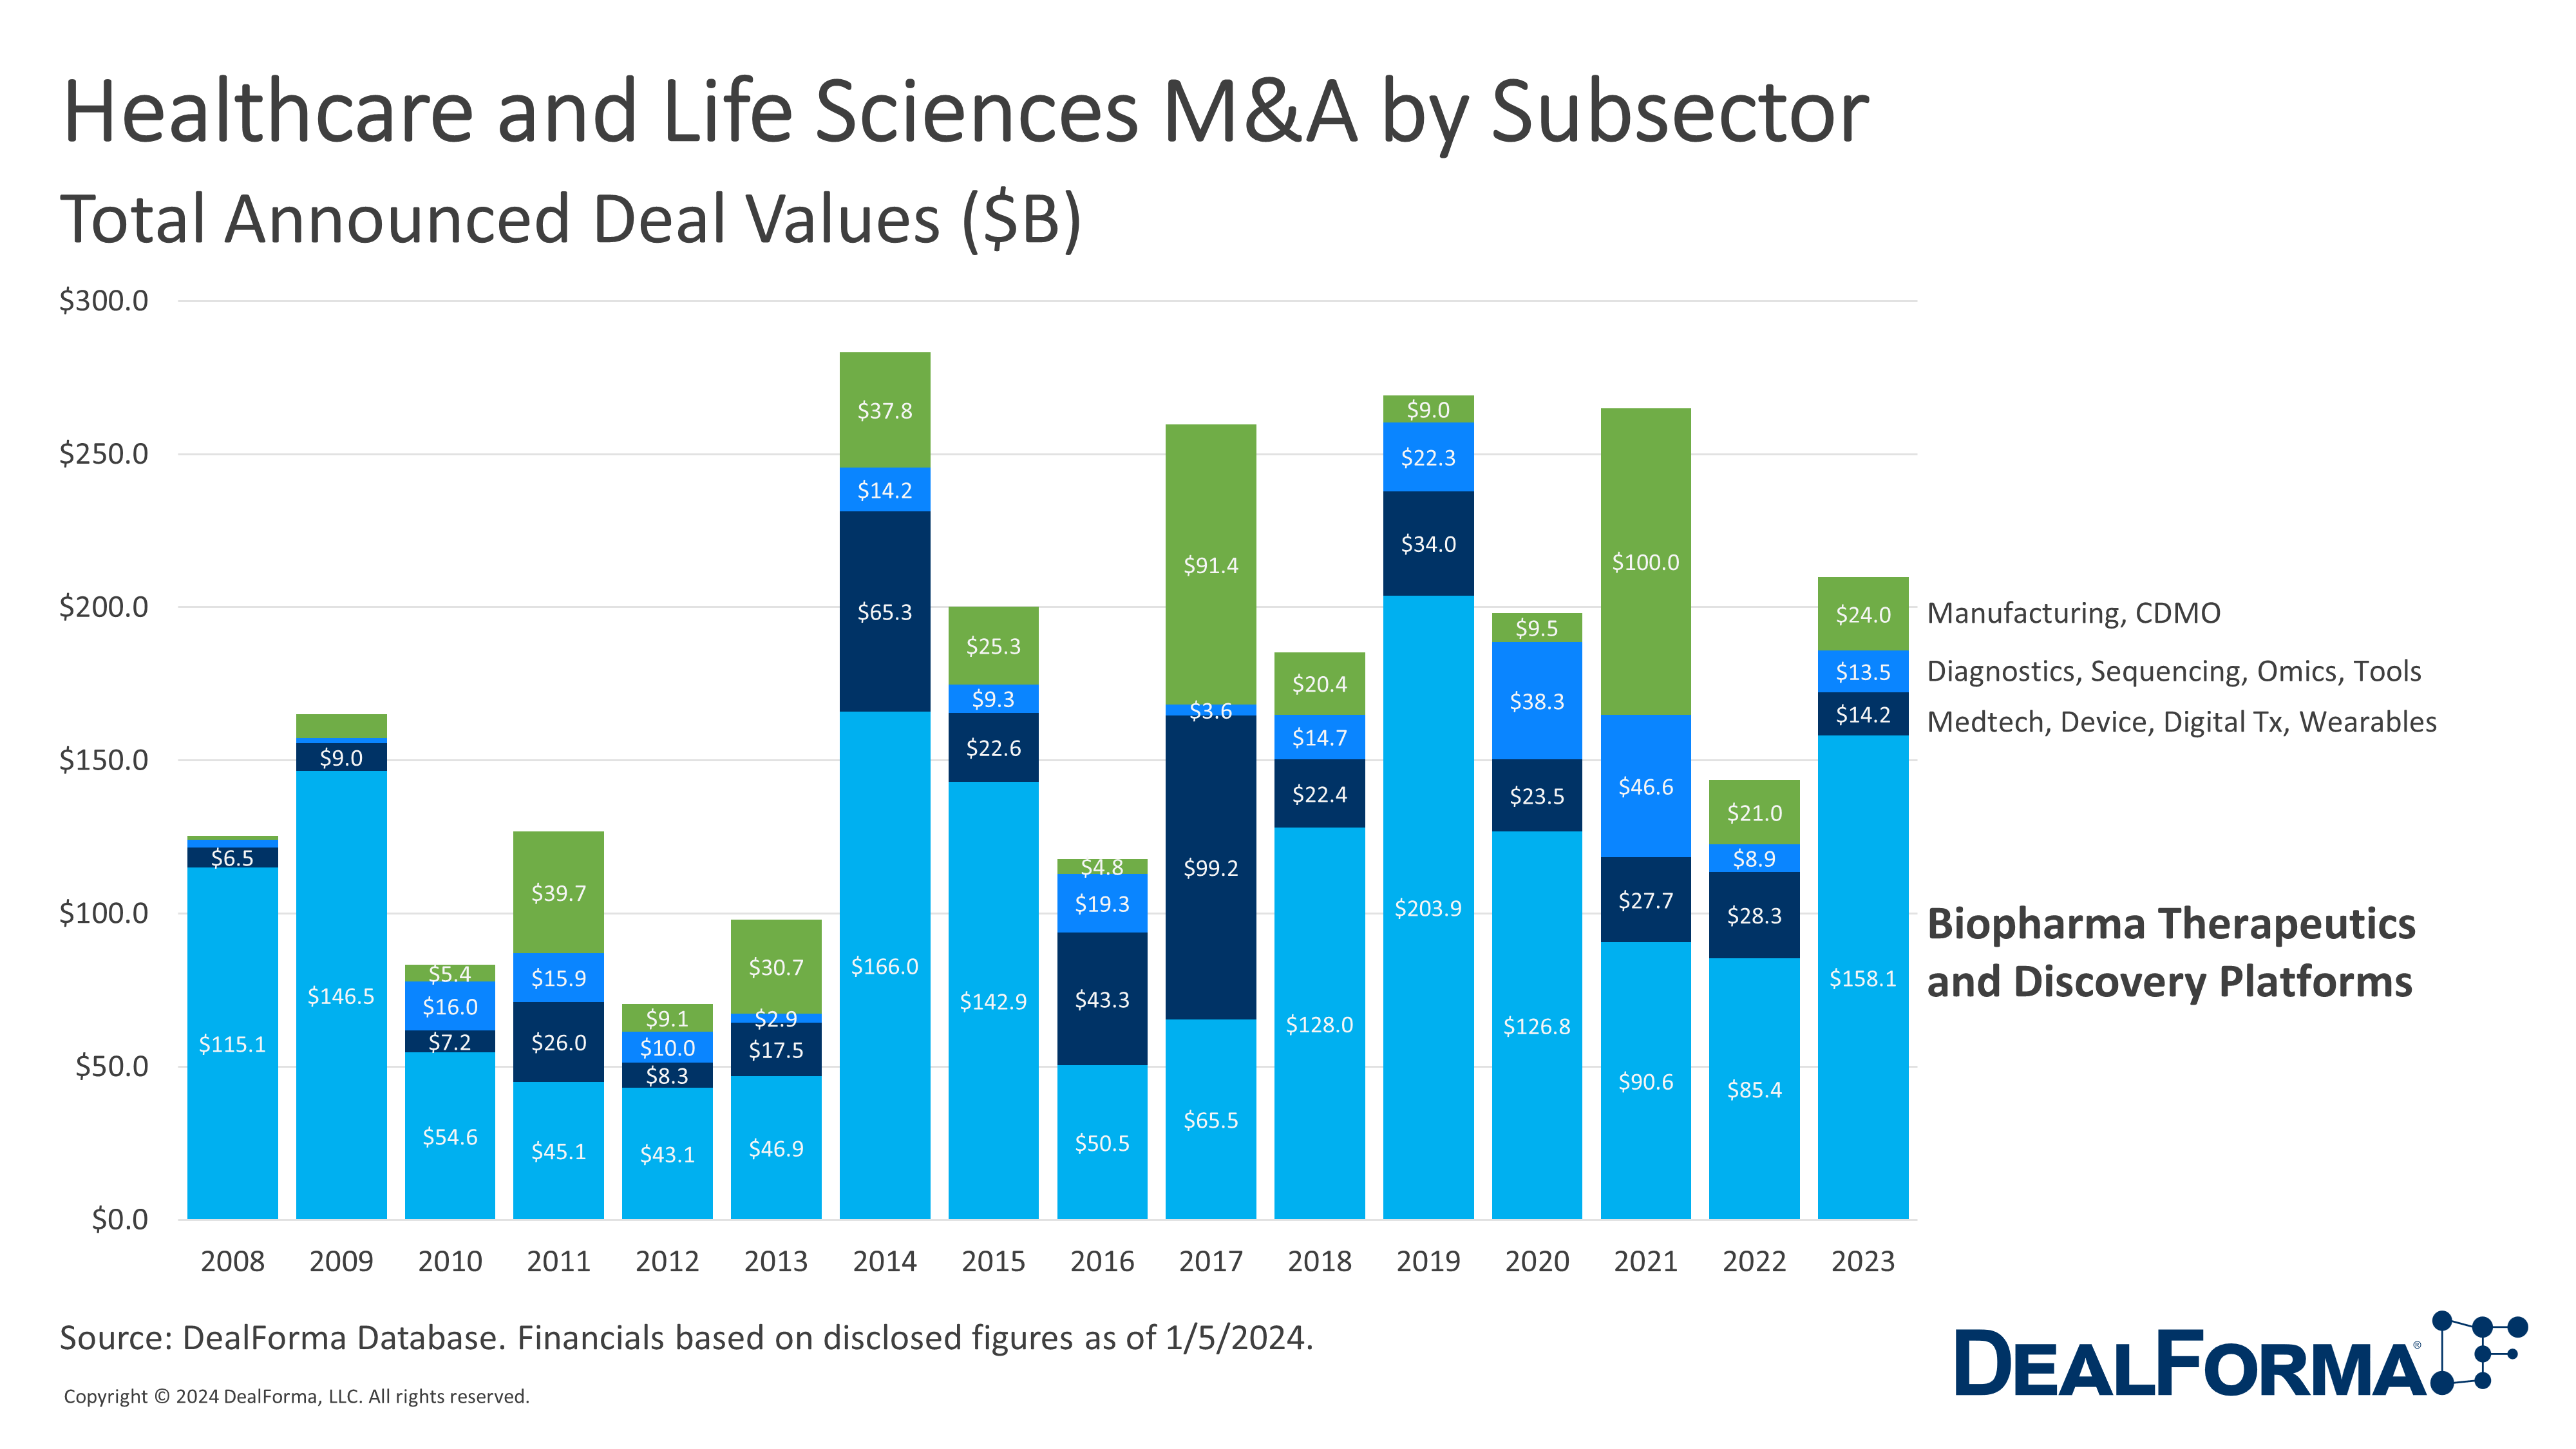 Healthcare and Life Sciences M&A by Subsector